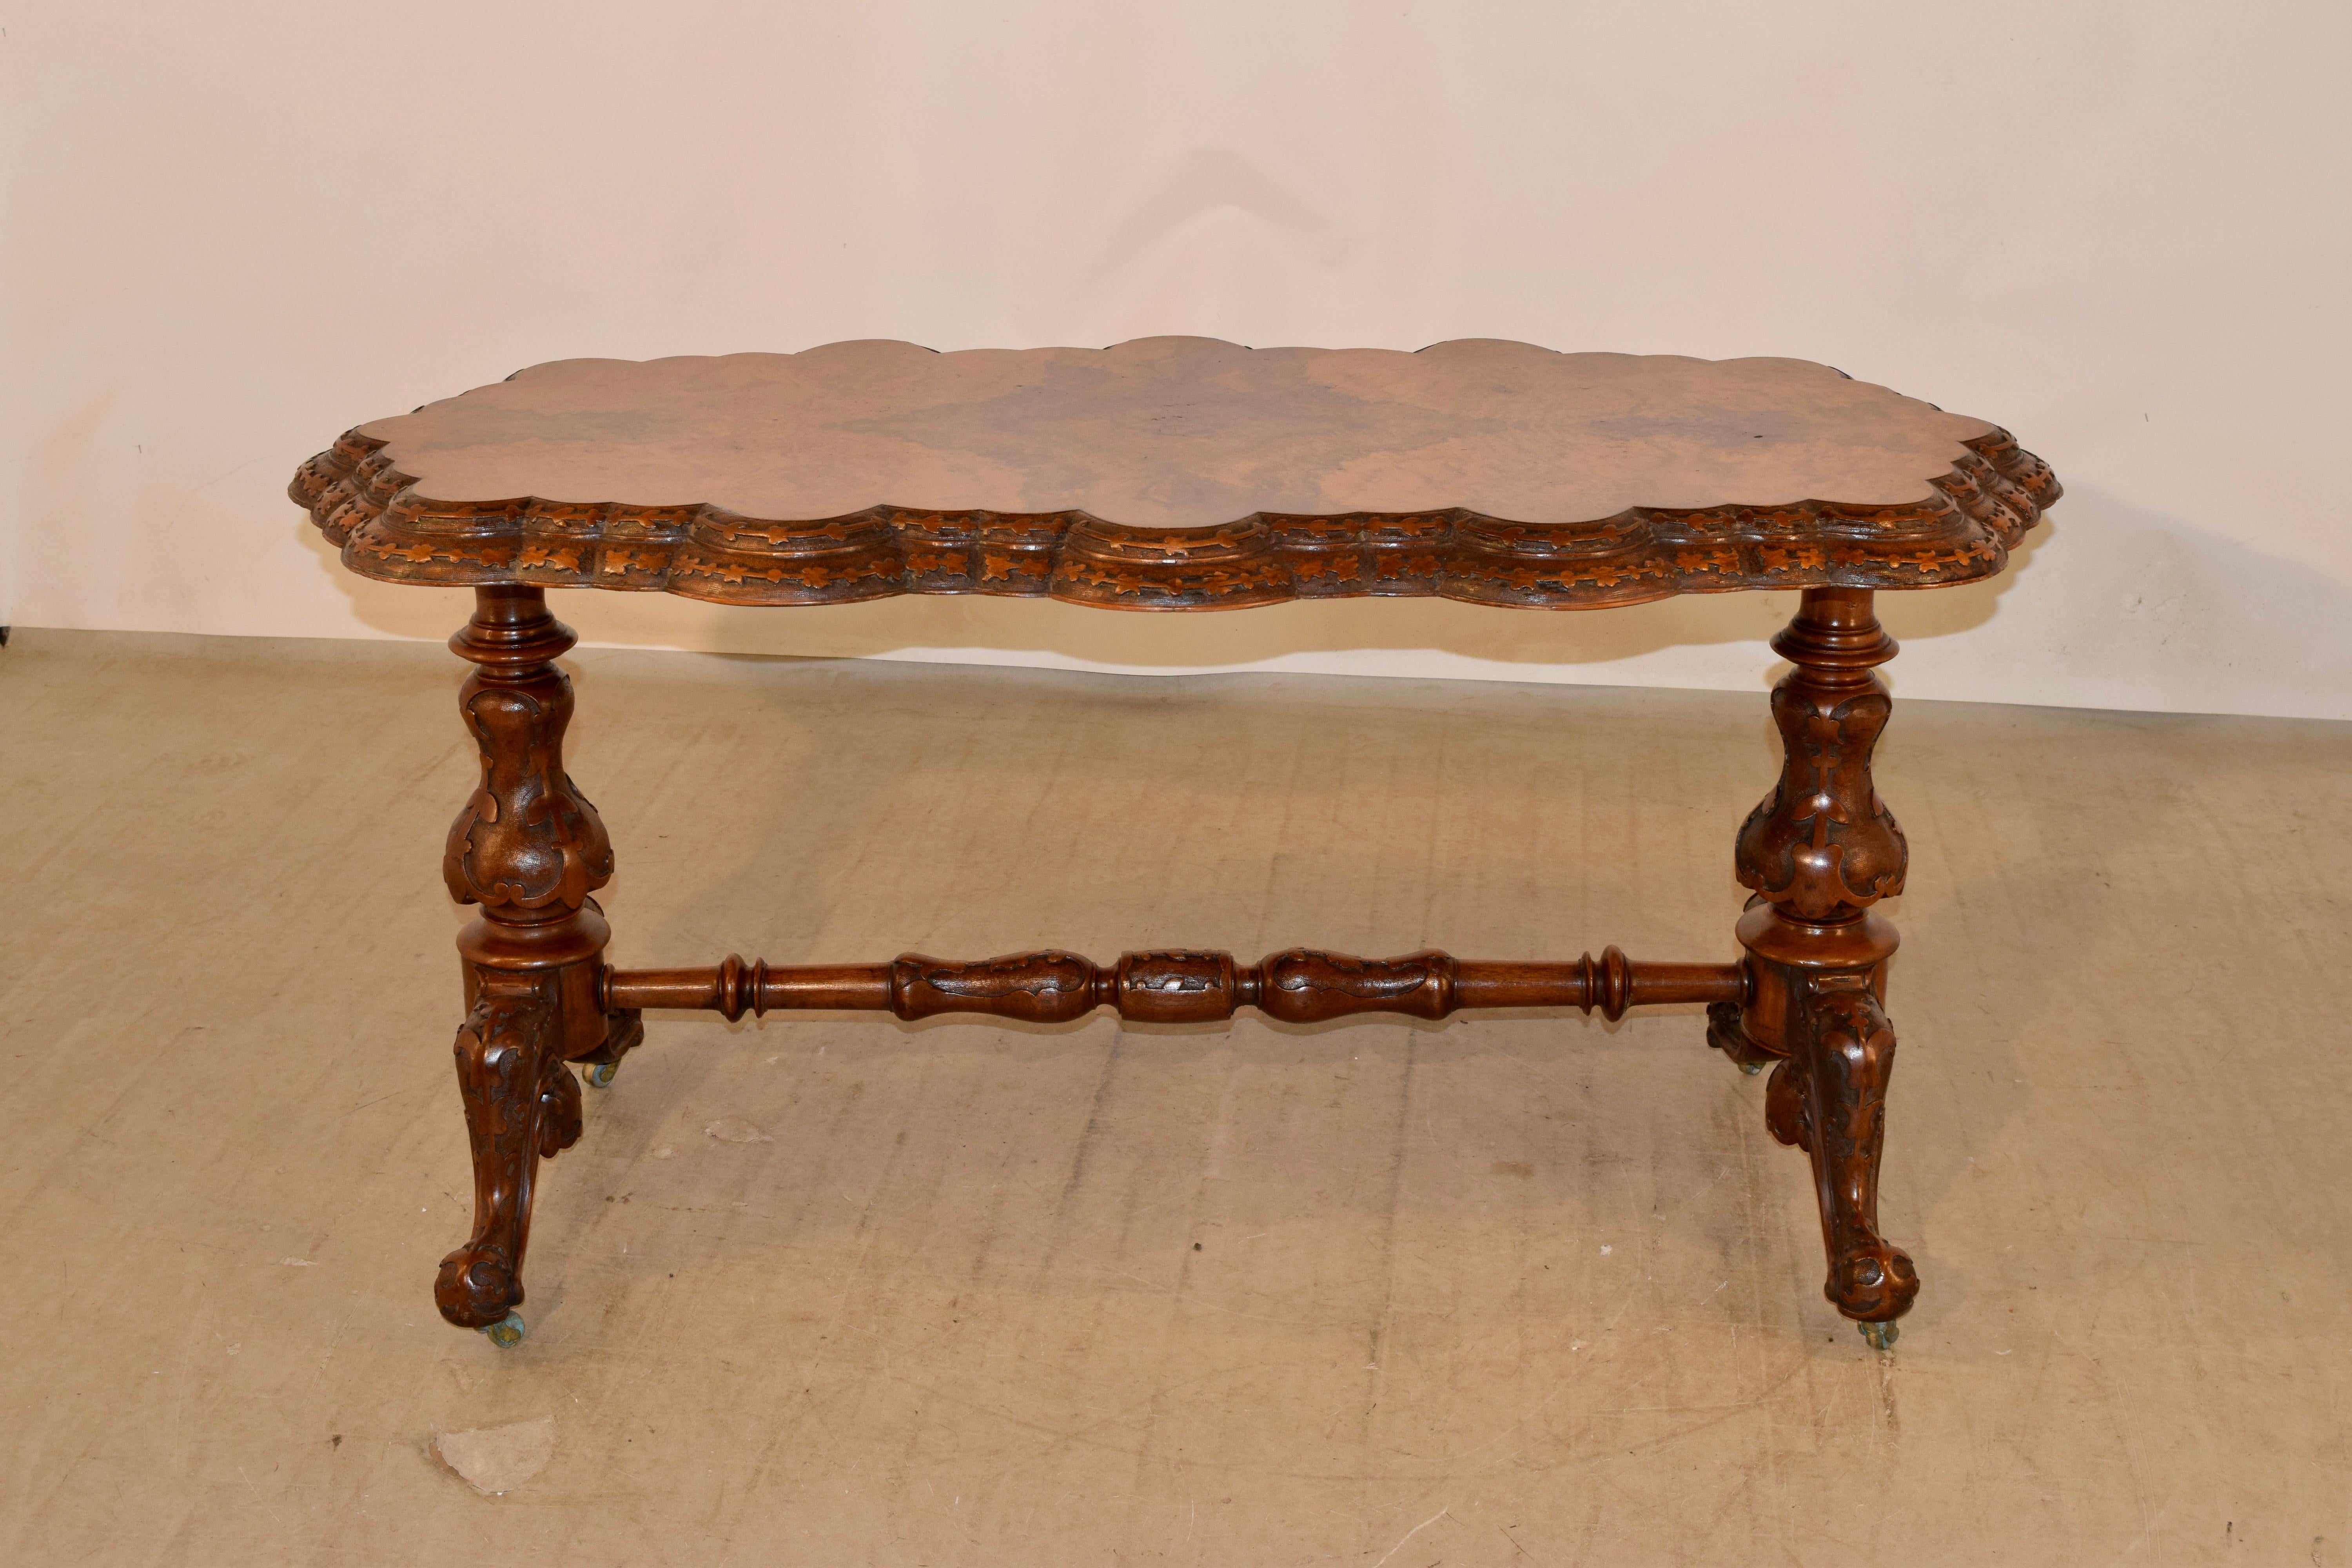 Superb quality late 19th century burl walnut stretcher table with a double beveled, scalloped and relief carved edge. The top is exquisitely grained - an absolute show stopper! The legs are also relief carved decorated pedestals, joined by a hand